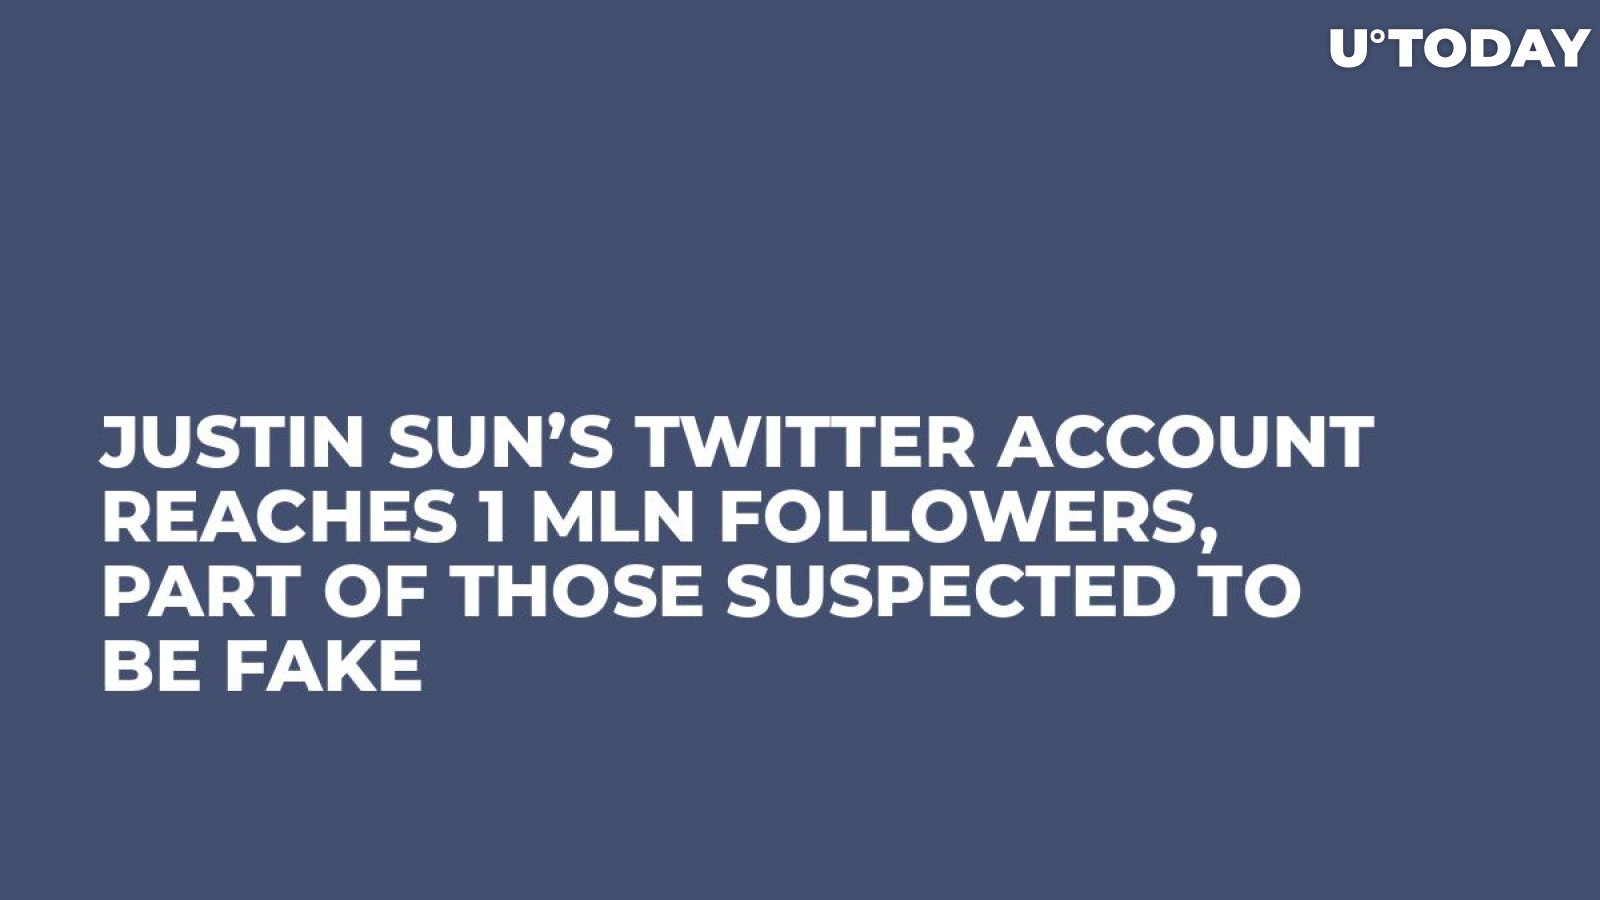 Justin Sun’s Twitter Account Reaches 1 Mln Followers, Part of Those Suspected to Be Fake